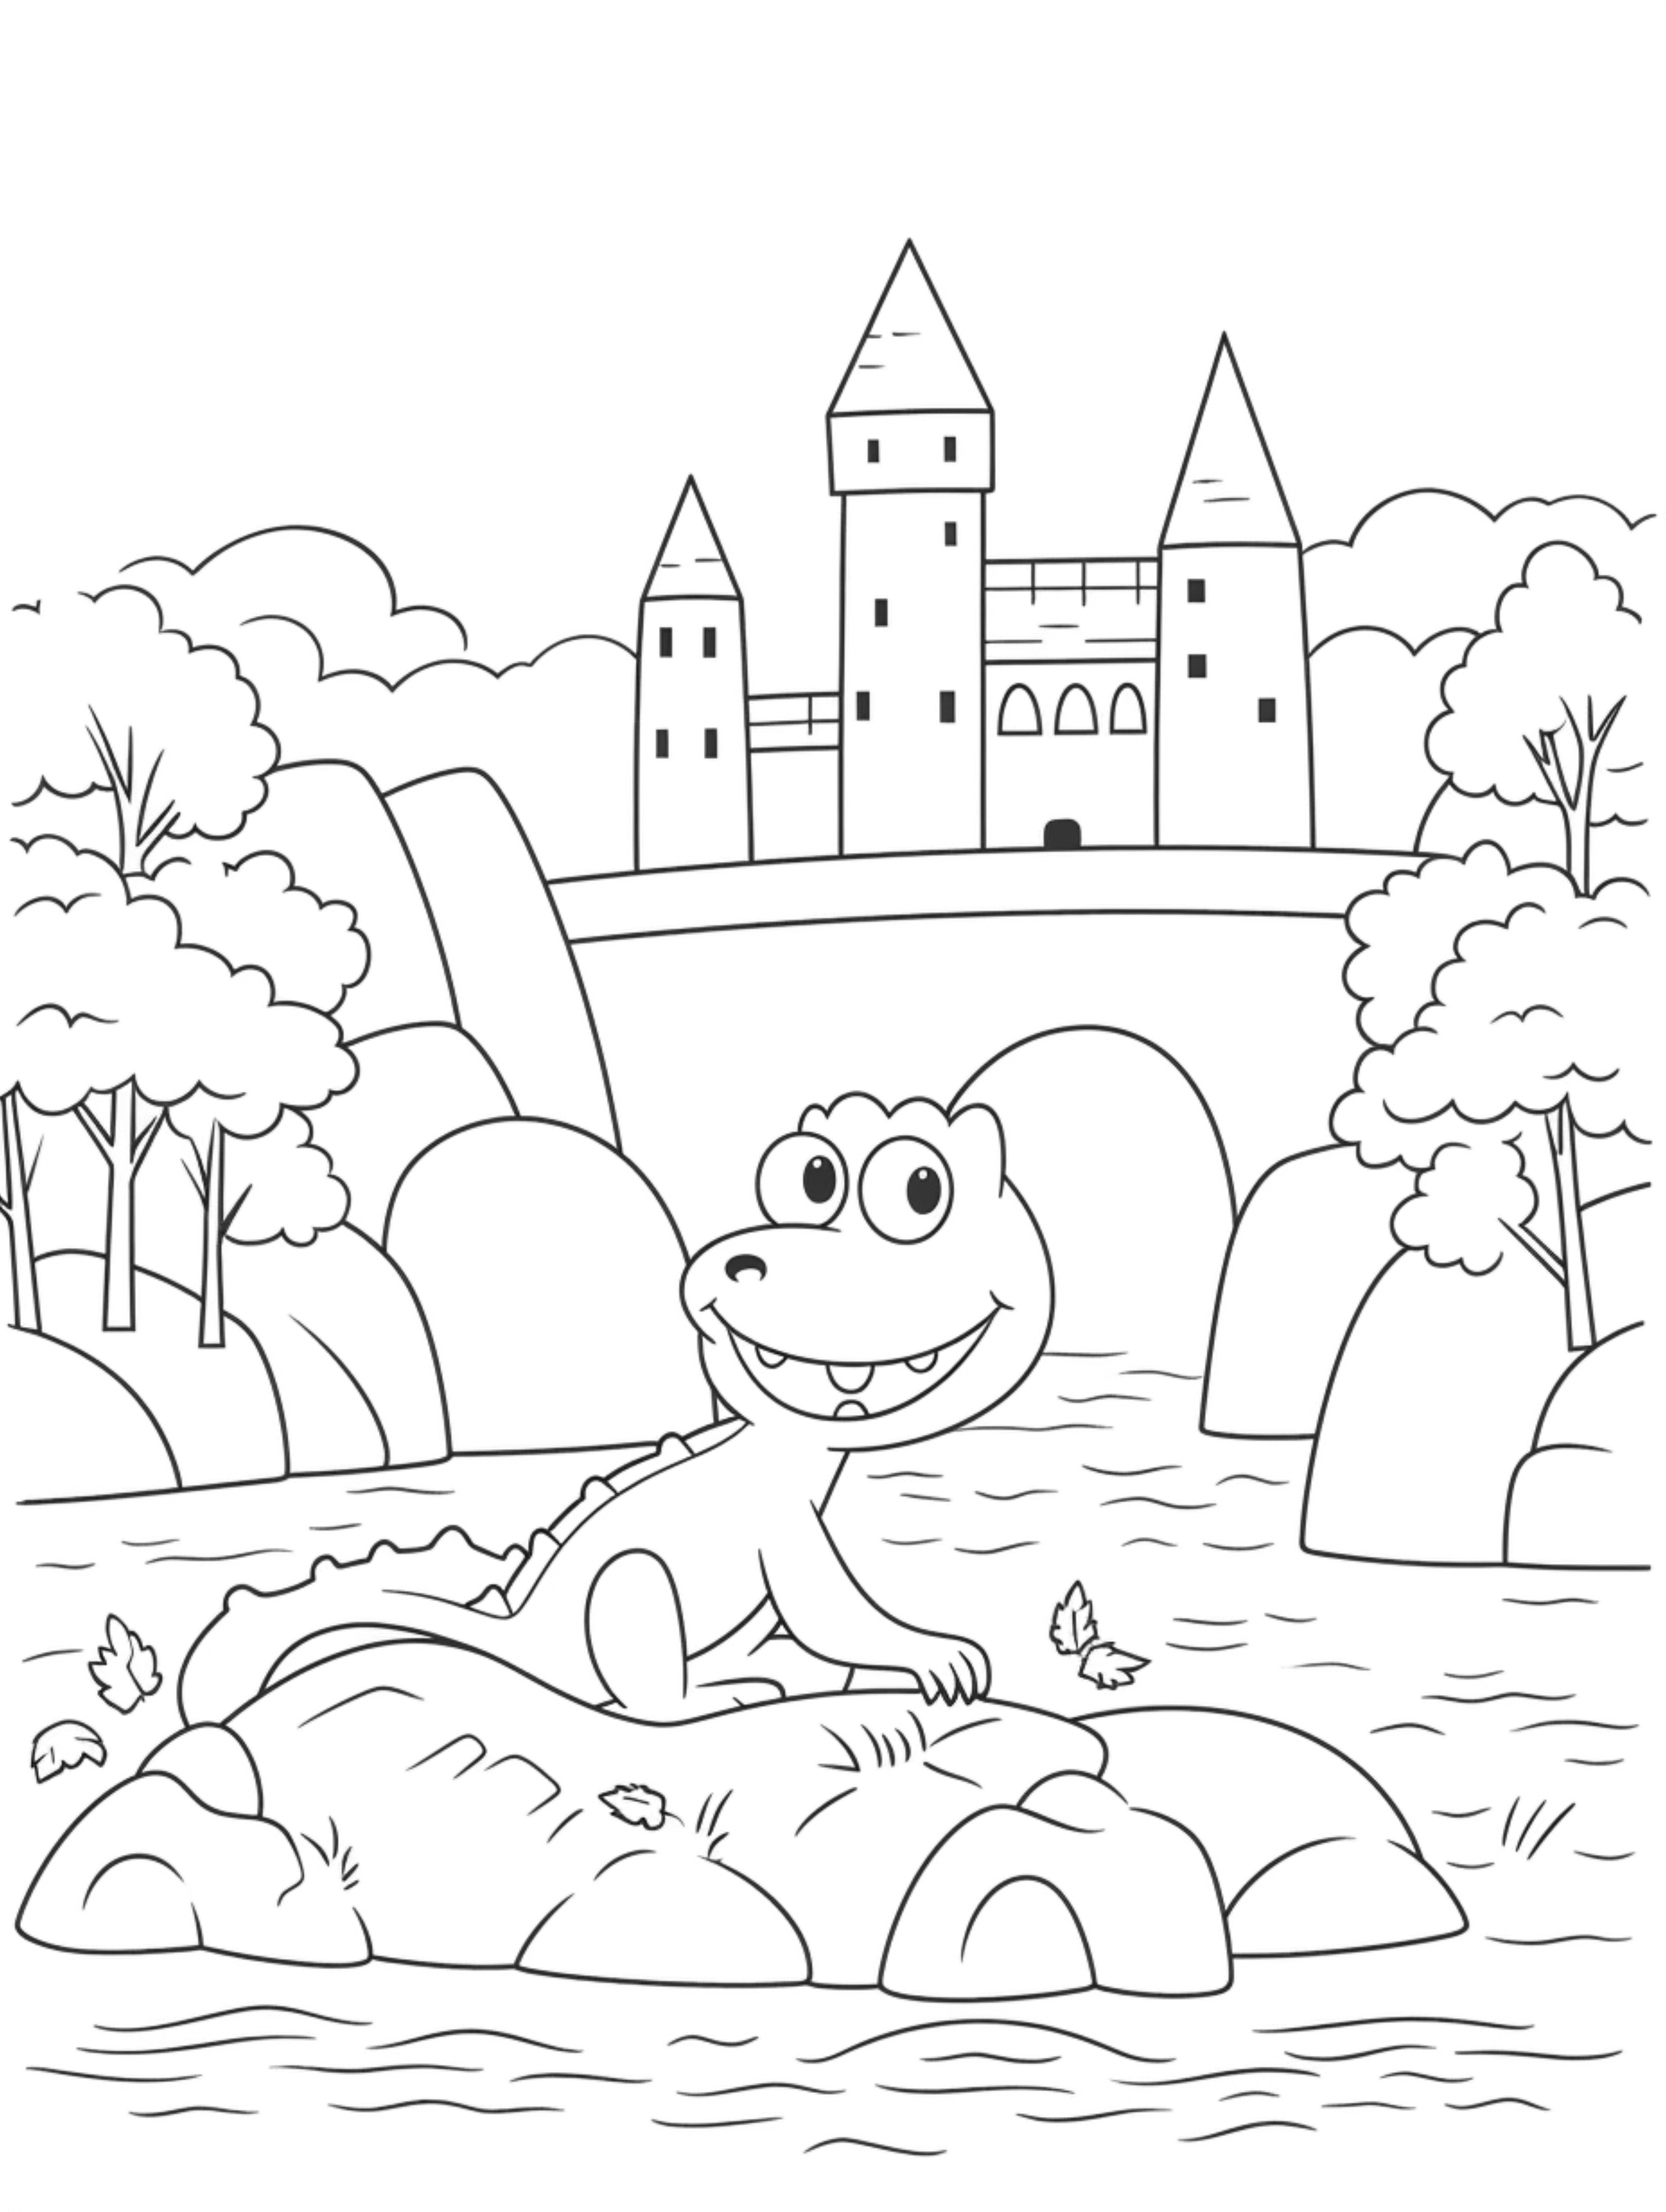 crocodile coloring pages